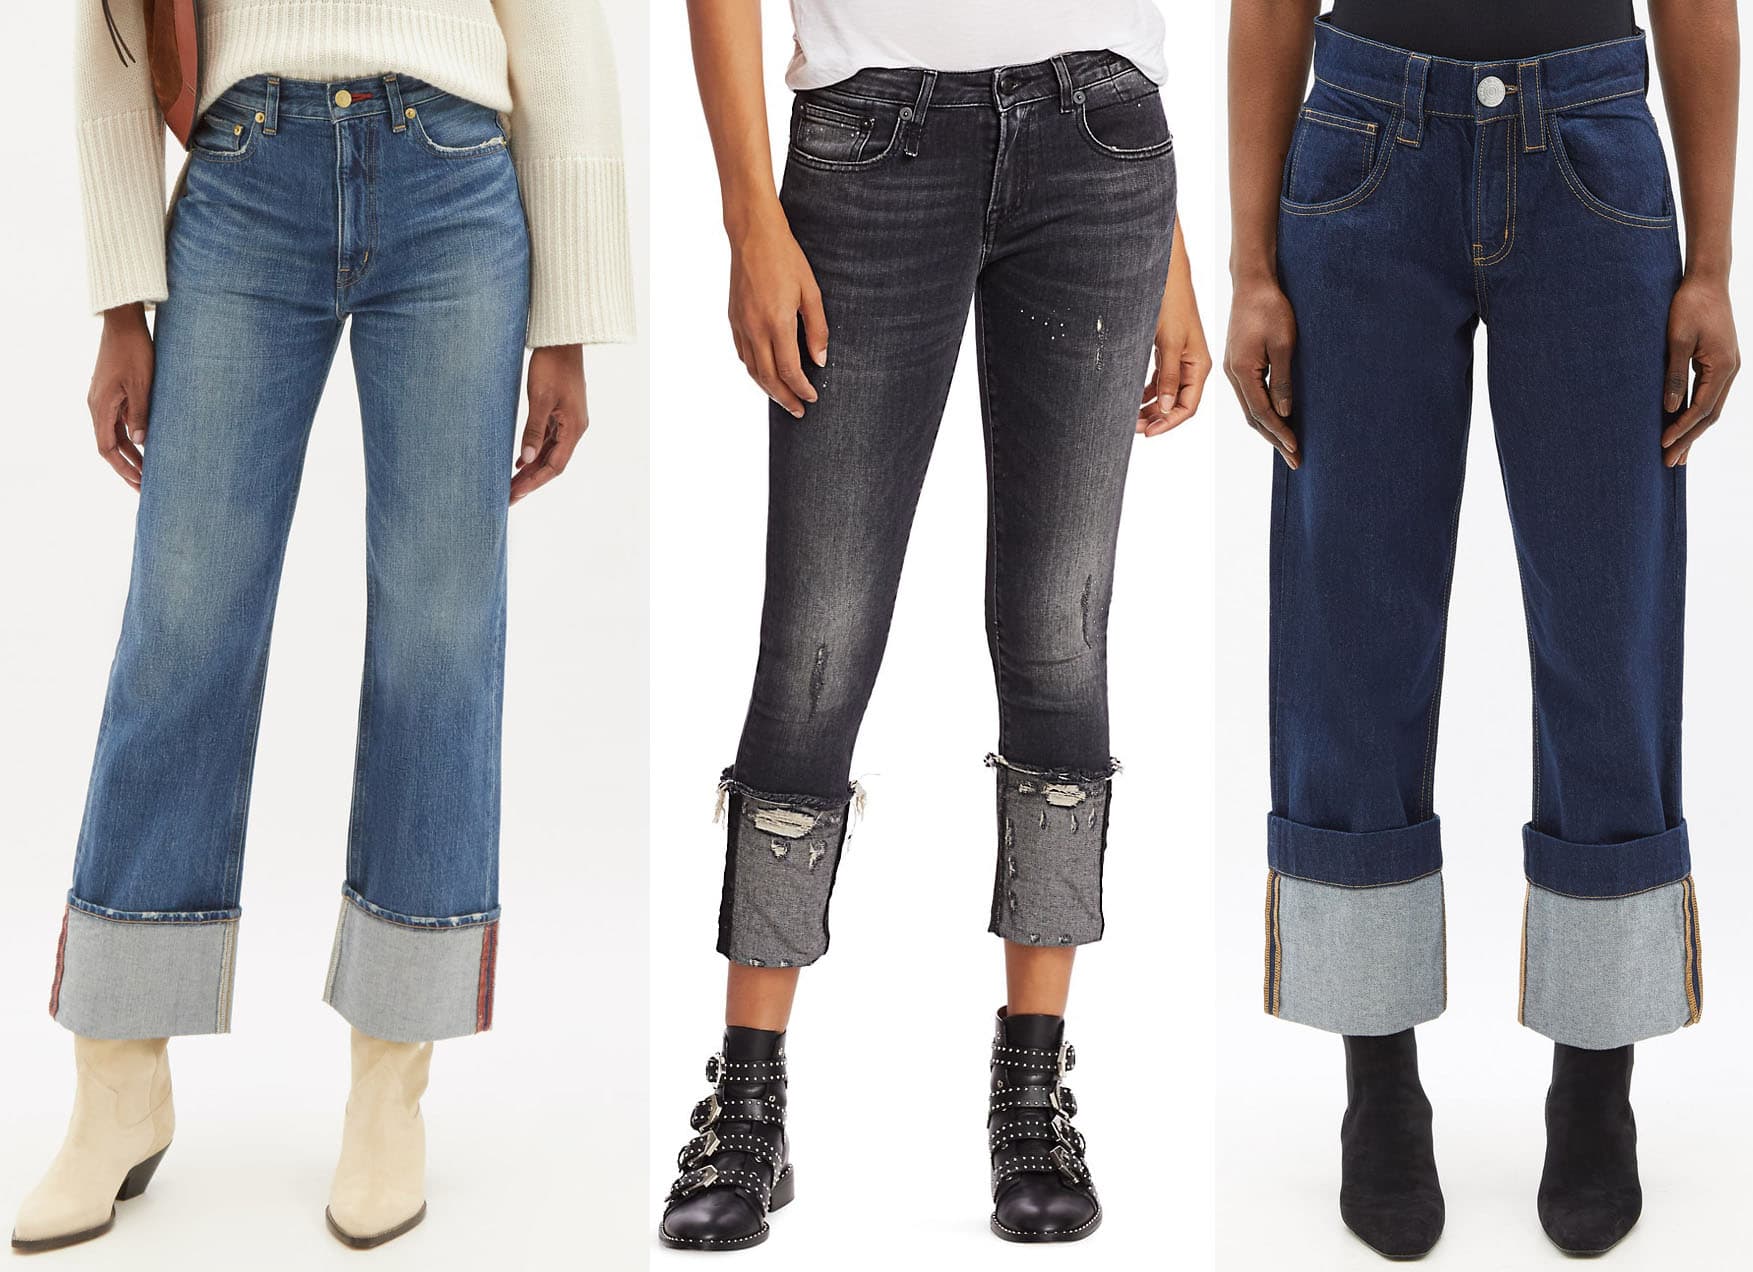 Switch up your look and show off your ankle boots by cuffing your denim jeans